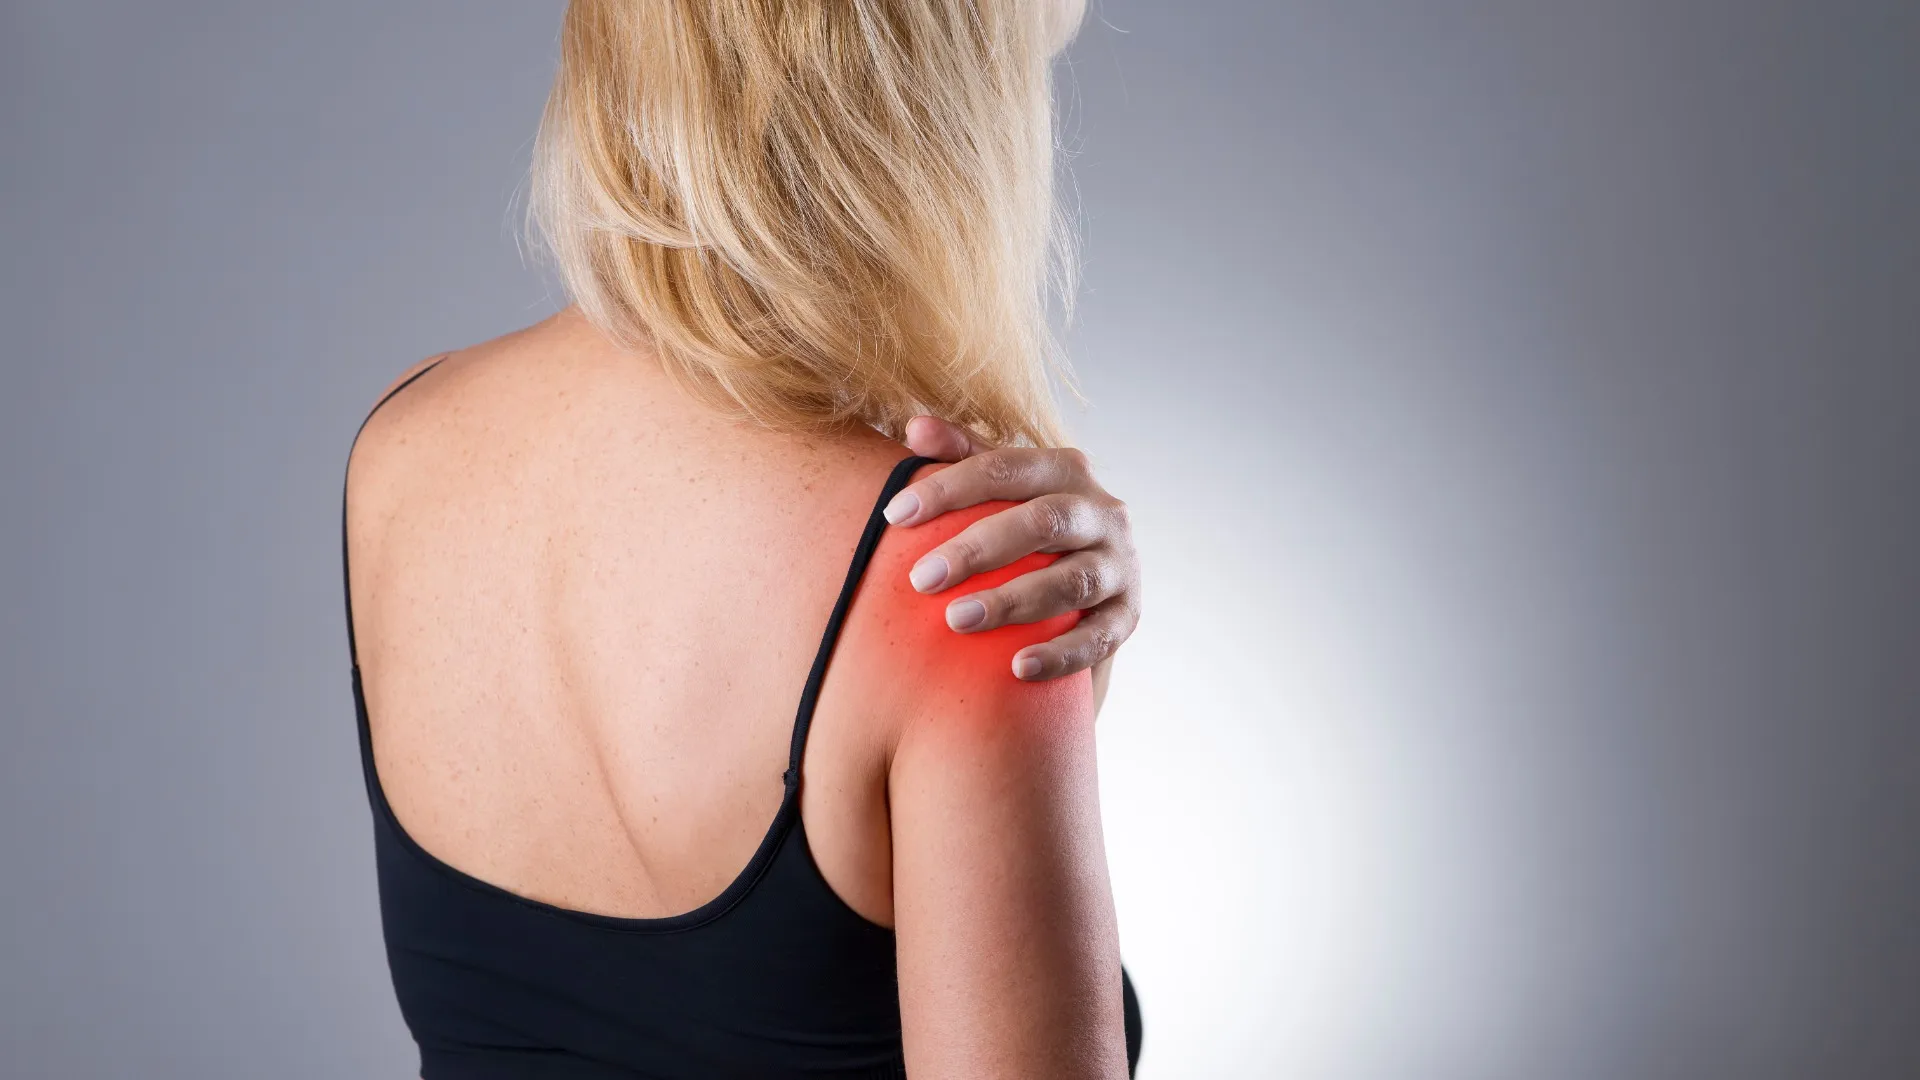 Frozen Shoulder: What Makes You More Susceptible, And What Can You Do?